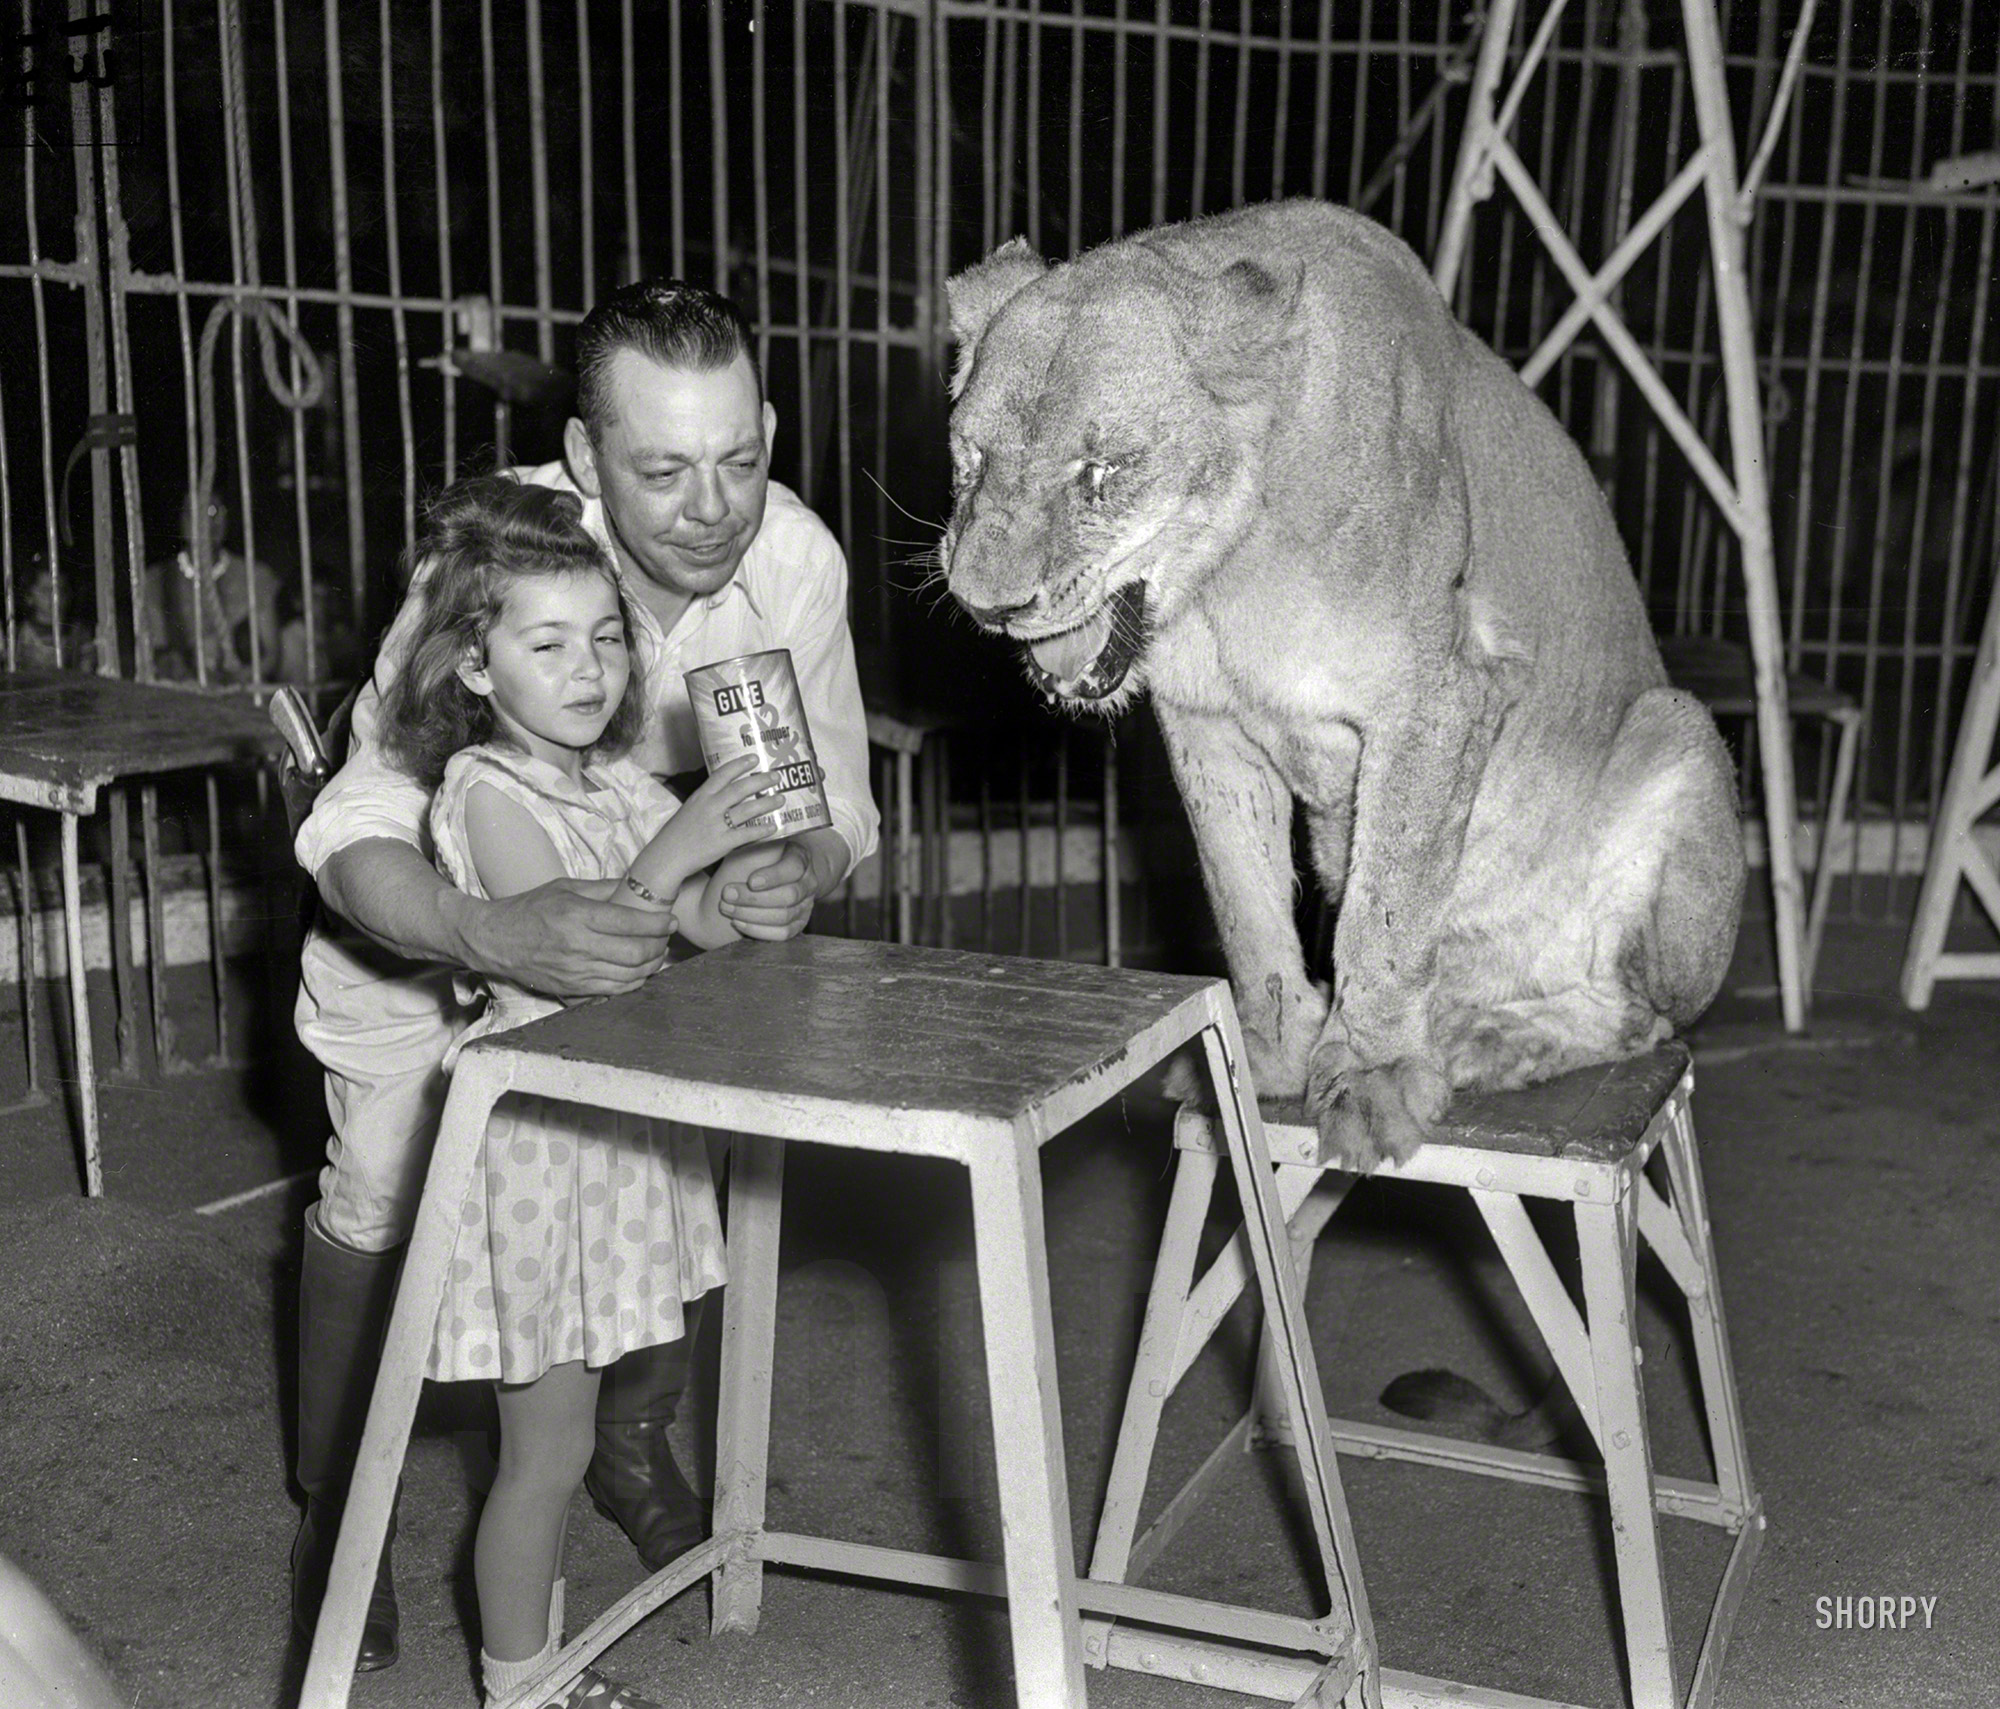 Chicago circa 1958. "American Cancer Society -- Circus lion tamer." Would you take a check? 4x5 acetate negative from the Shorpy News Archive. View full size.